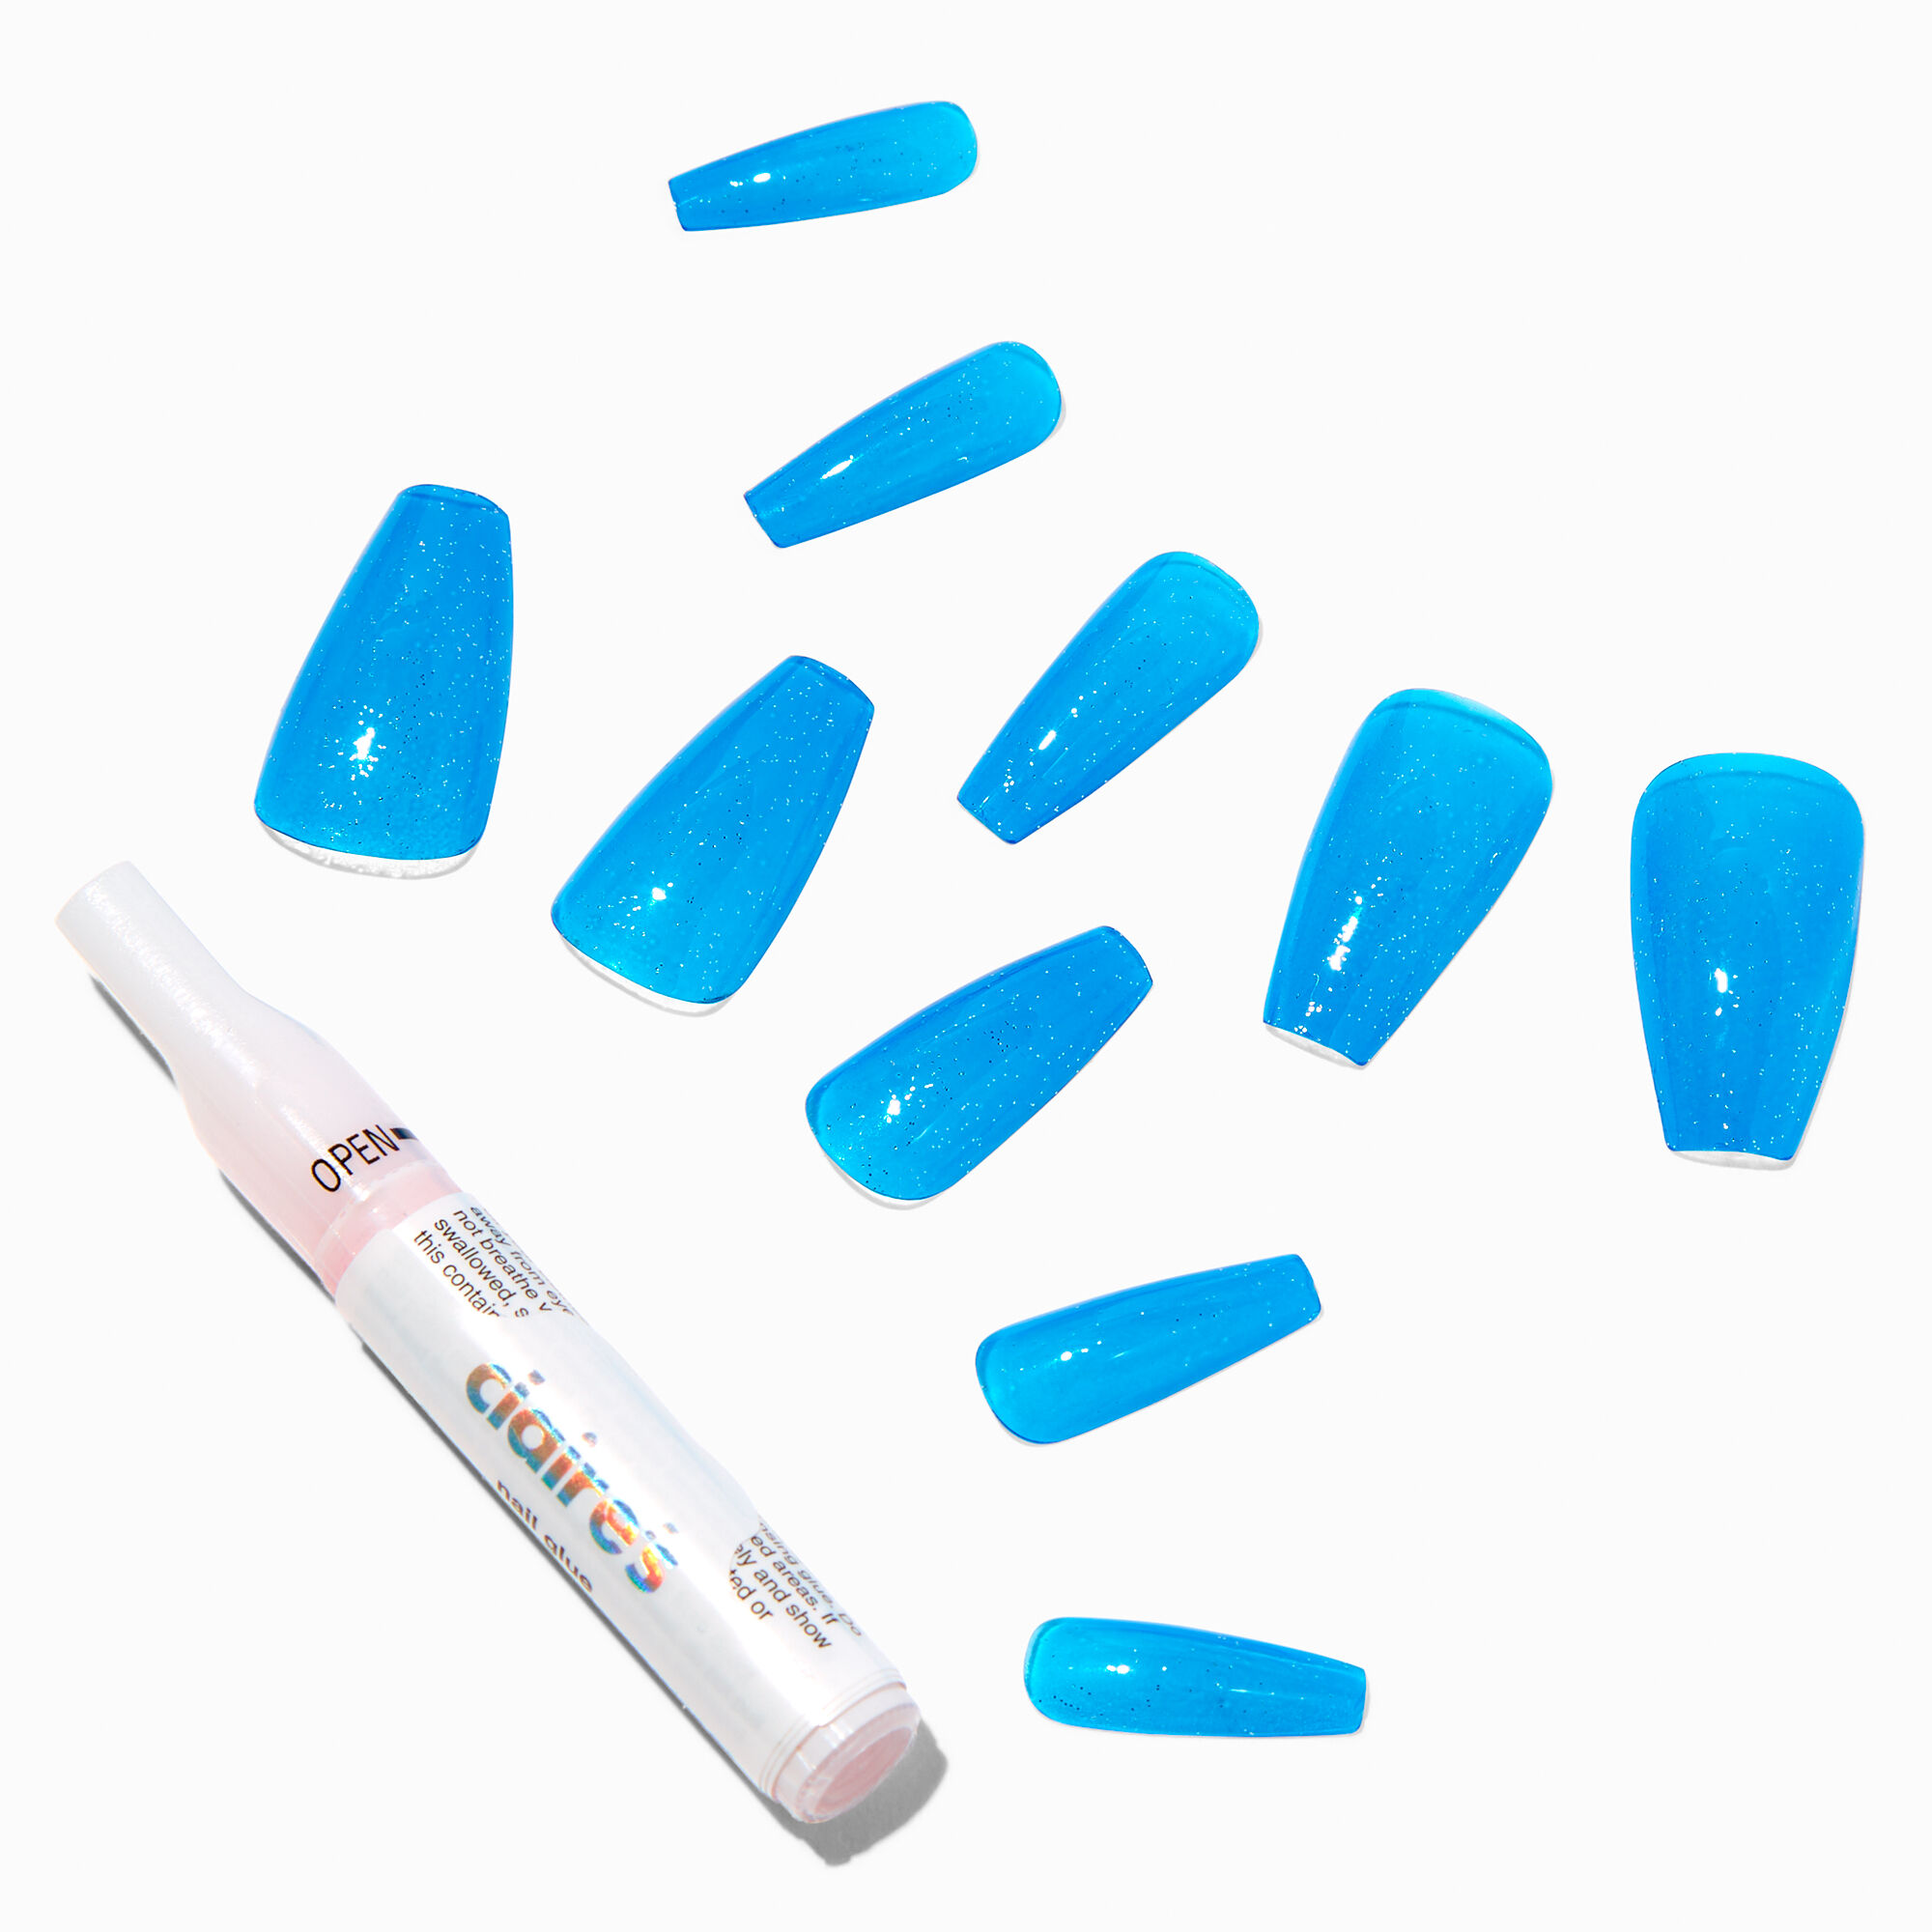 View Claires Glitter Jelly Squareletto Vegan Faux Nail Set 24 Pack Blue information